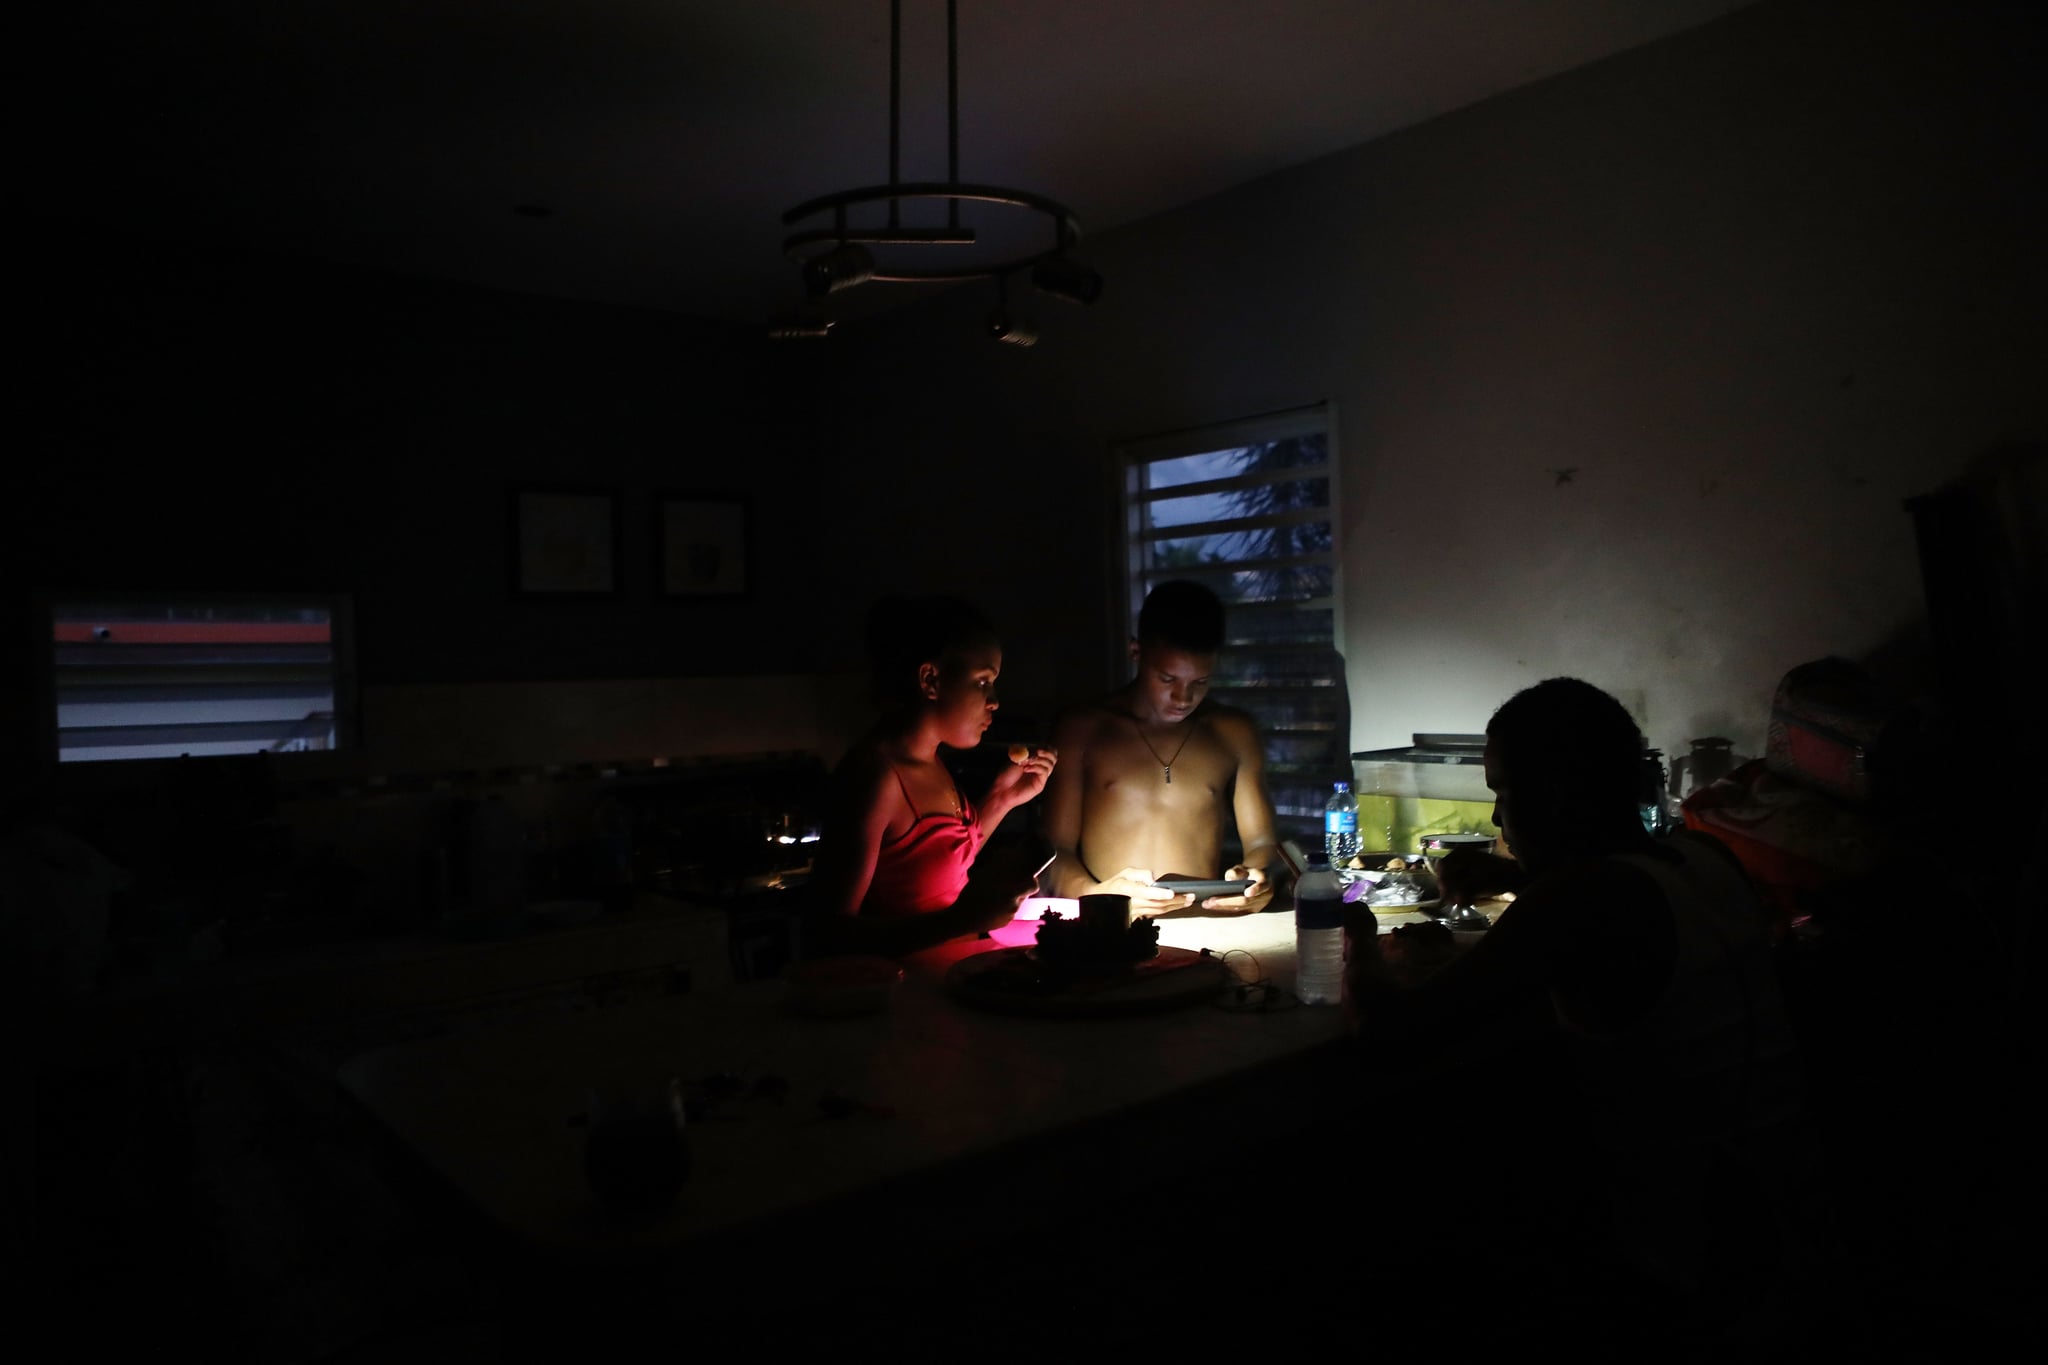 SAN ISIDRO, PUERTO RICO - DECEMBER 21:  Young members of the extended Medina family eat dinner at dusk with light from a cell phone on December 21, 2017 in San Isidro, Puerto Rico. The community was hard-hit by Hurricane Maria and remains mostly without grid electricity. Barely three months after Hurricane Maria made landfall, approximately one-third of the devastated island is still without electricity. While the official death toll from the massive storm remains at 64, The New York Times recently reported the actual toll for the storm and its aftermath likely stands at more than 1,000. Puerto Rico's governor has ordered a recount as the holiday season approaches.  (Photo by Mario Tama/Getty Images)